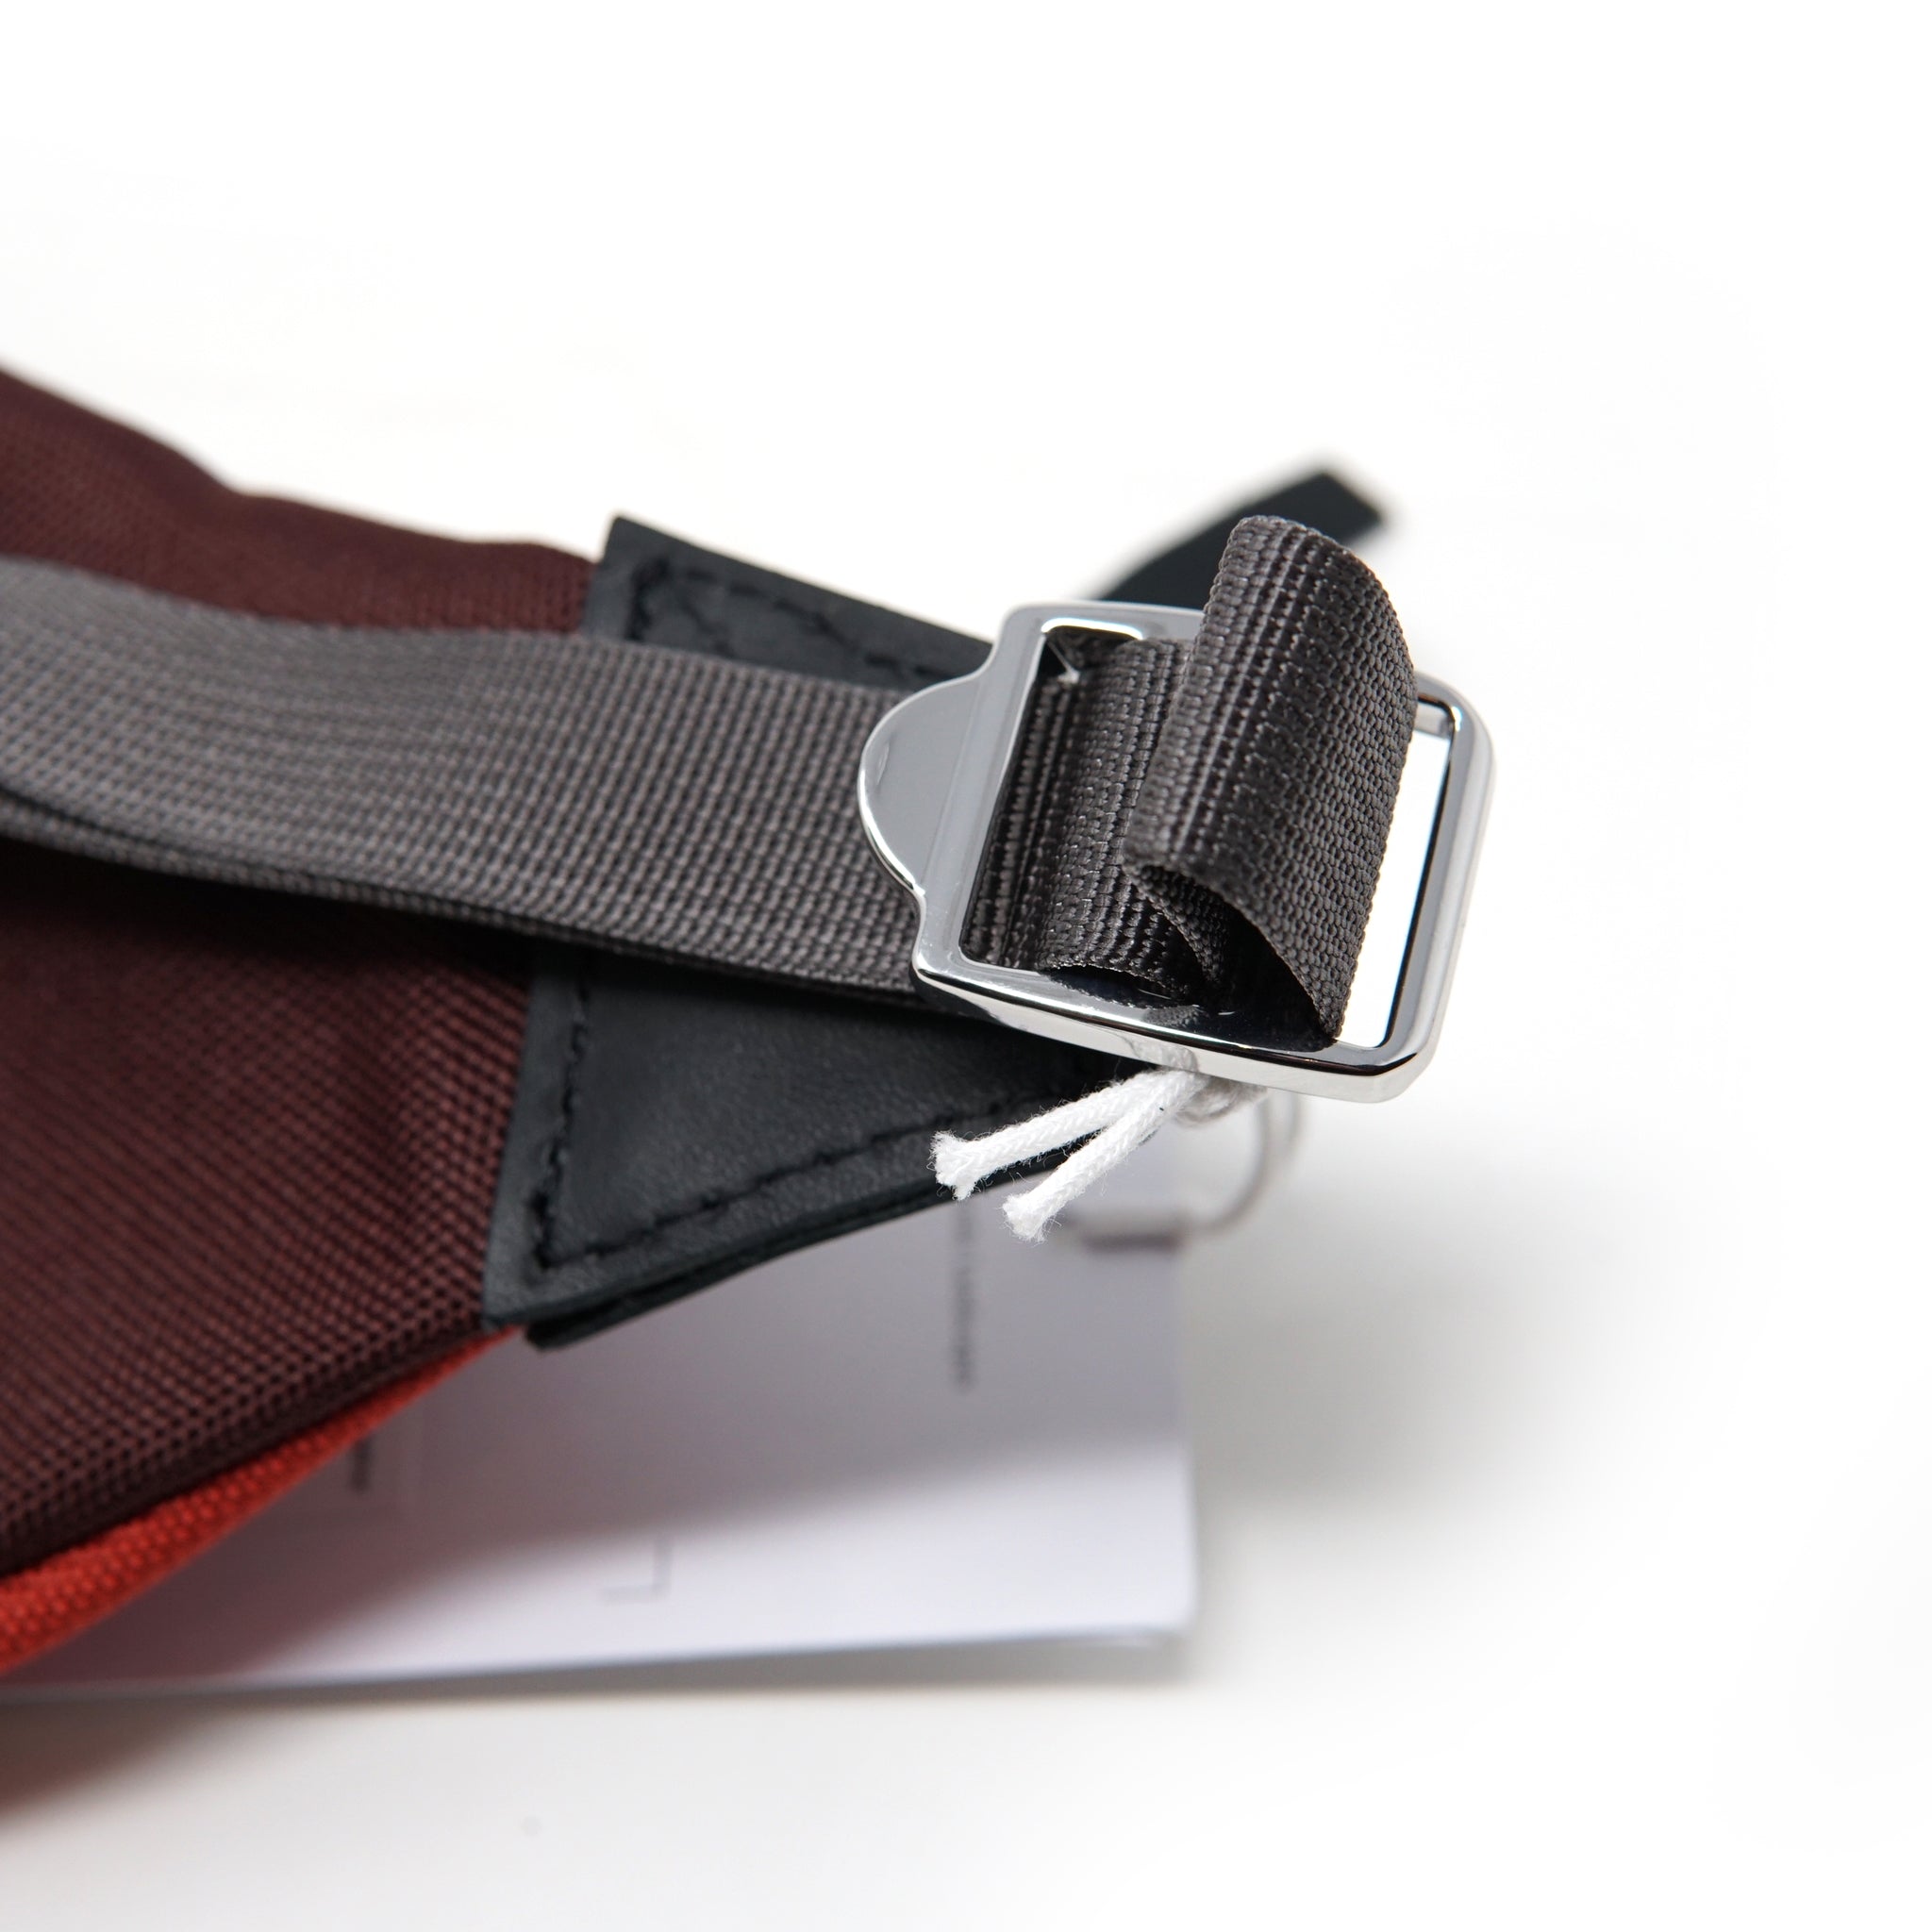 No:SQA1957 | Name:ASTE | Color:Multi Moss Red With Black Leather【SANDQVIST_サンドクヴィスト】